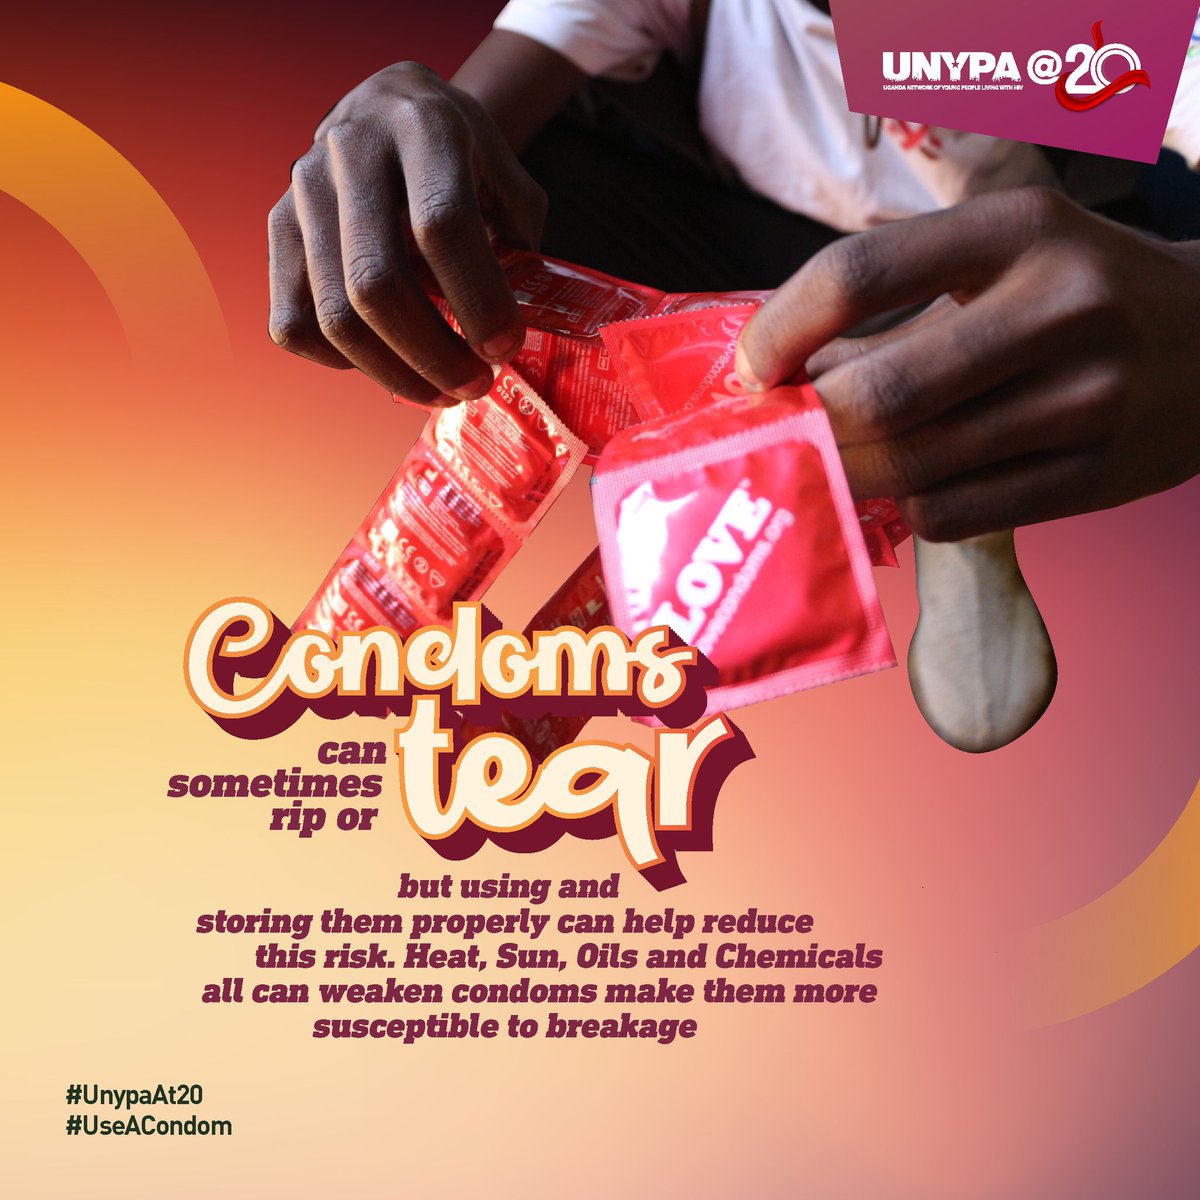 Keep condoms away from heat and light, which can dry them out. 

So it's important to use and store them properly. ✌️

#UseACondom #UnypaAt20